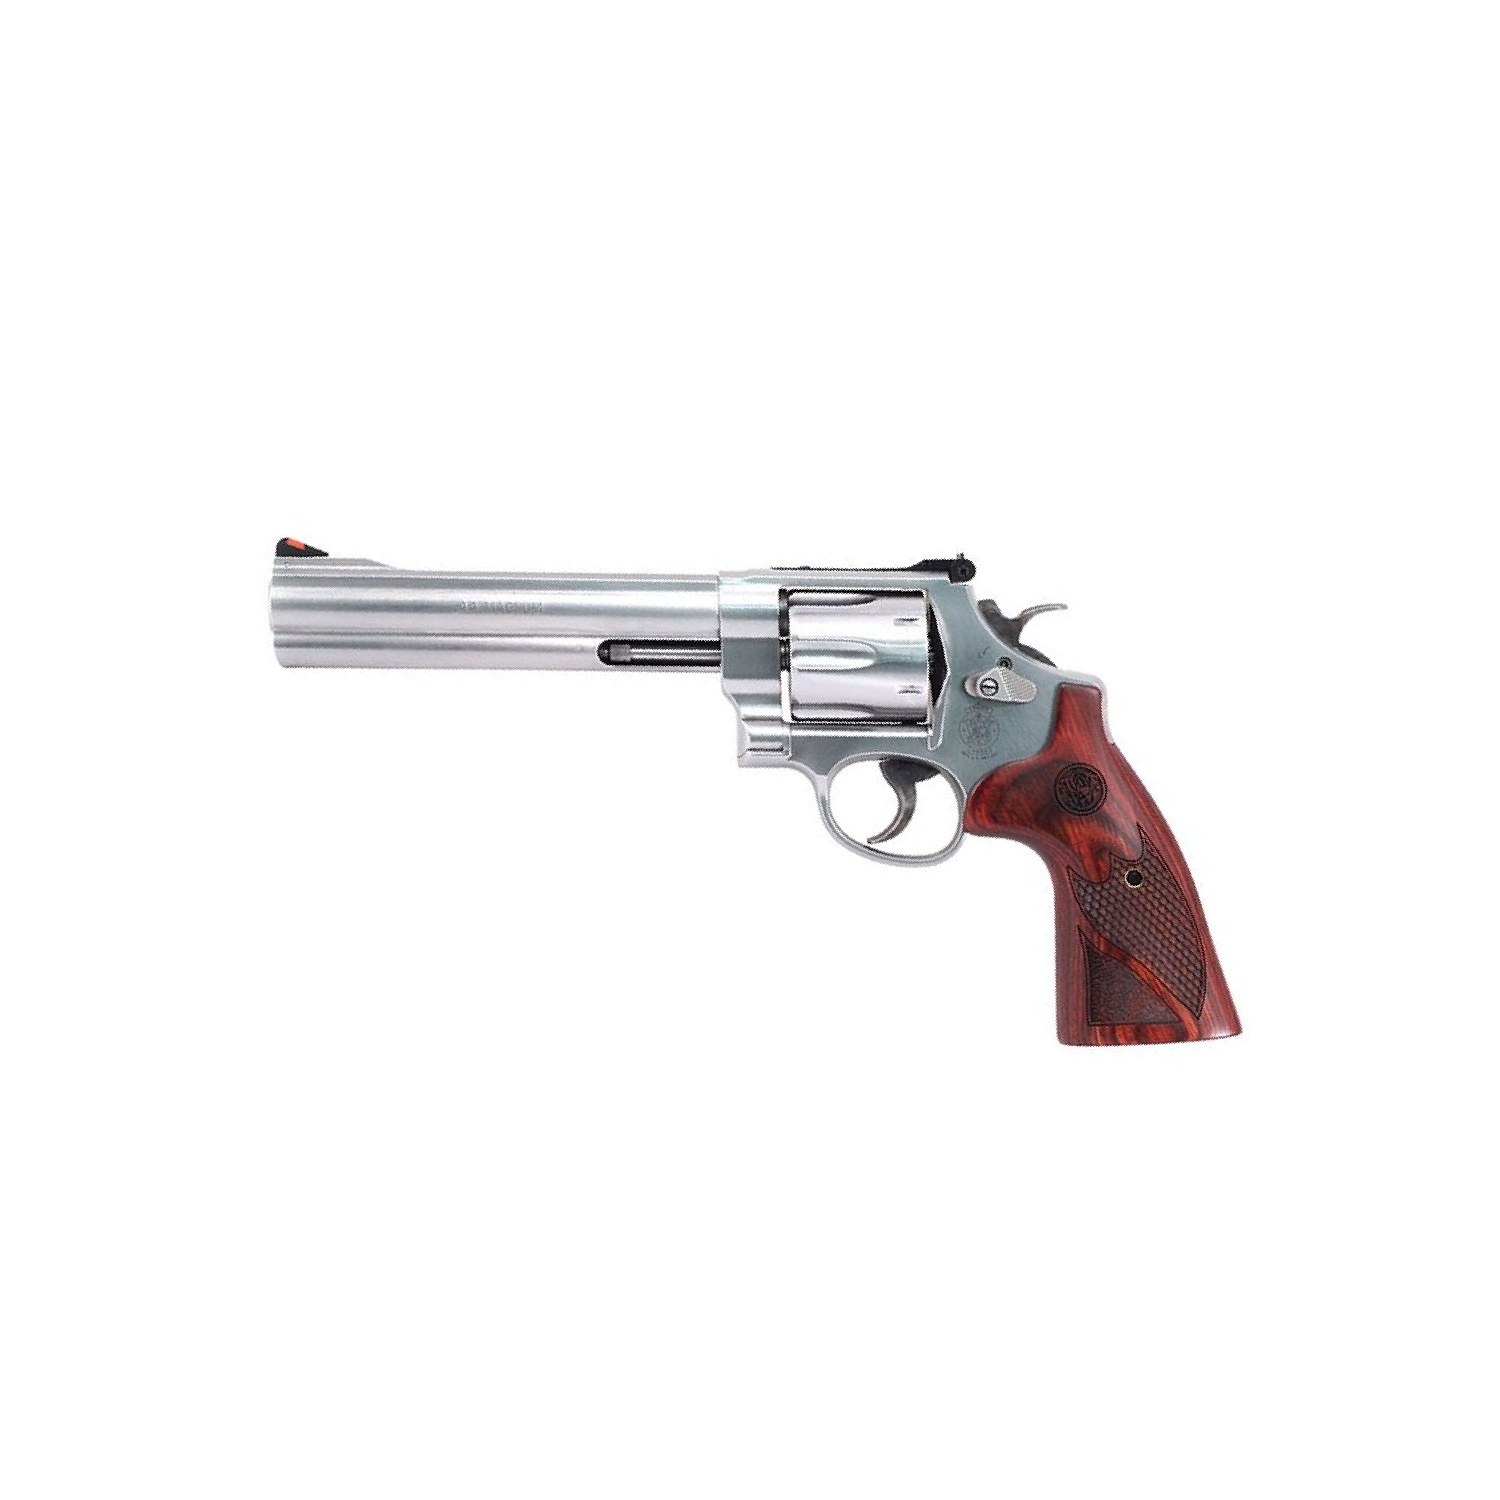 Smith & Wesson 686 Plus DeLuxe 6´´